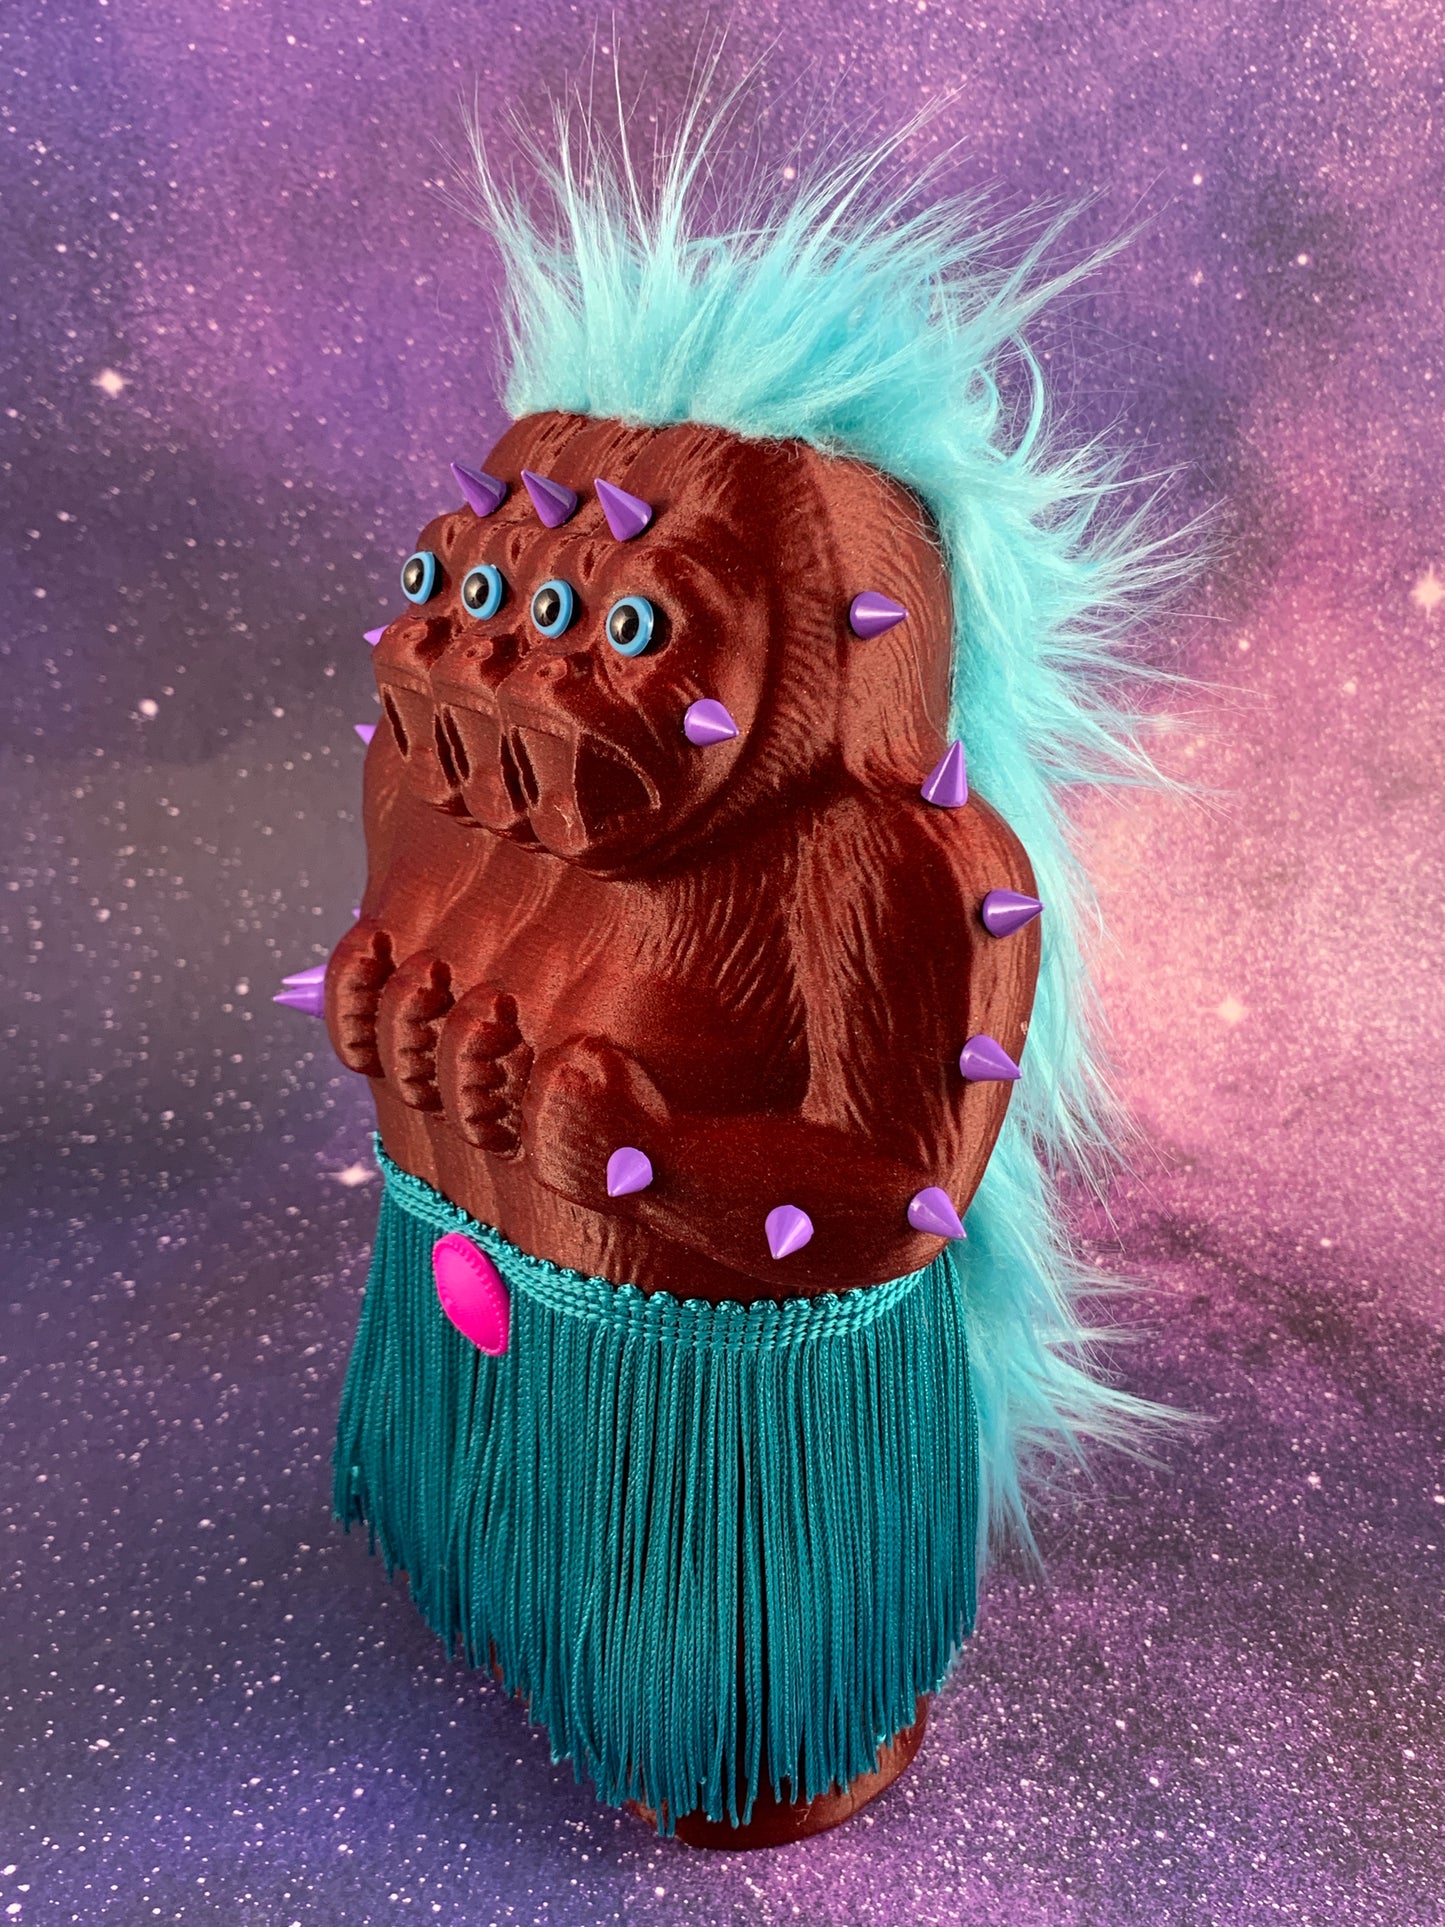 Royal Freak of Nature Ape From Beyond the Planets